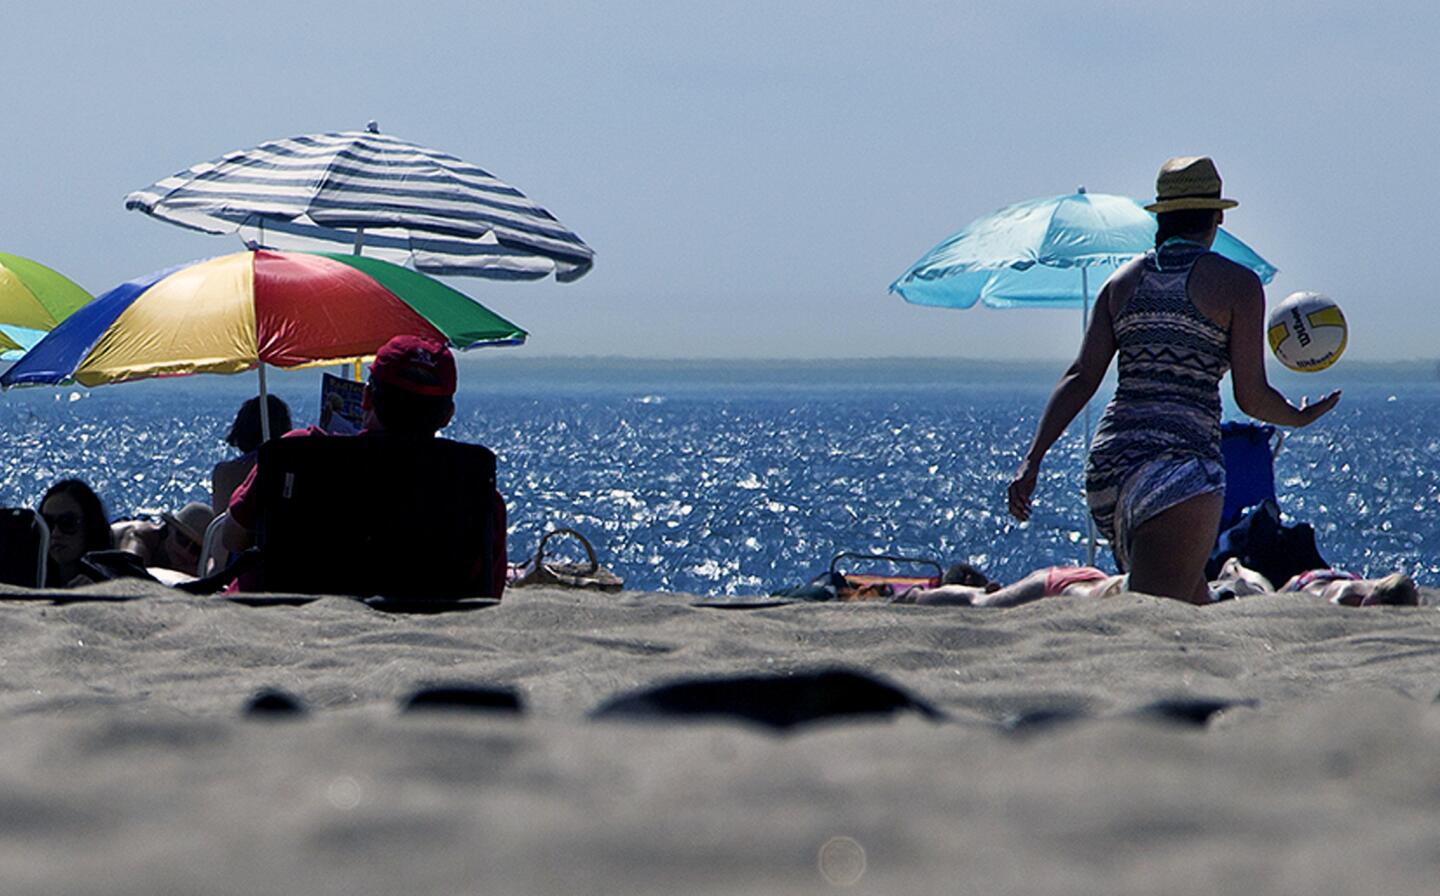 Unseasonably hot weather bought crowds to the beach as temperatures reached 90 degrees Saturday in Laguna Beach.